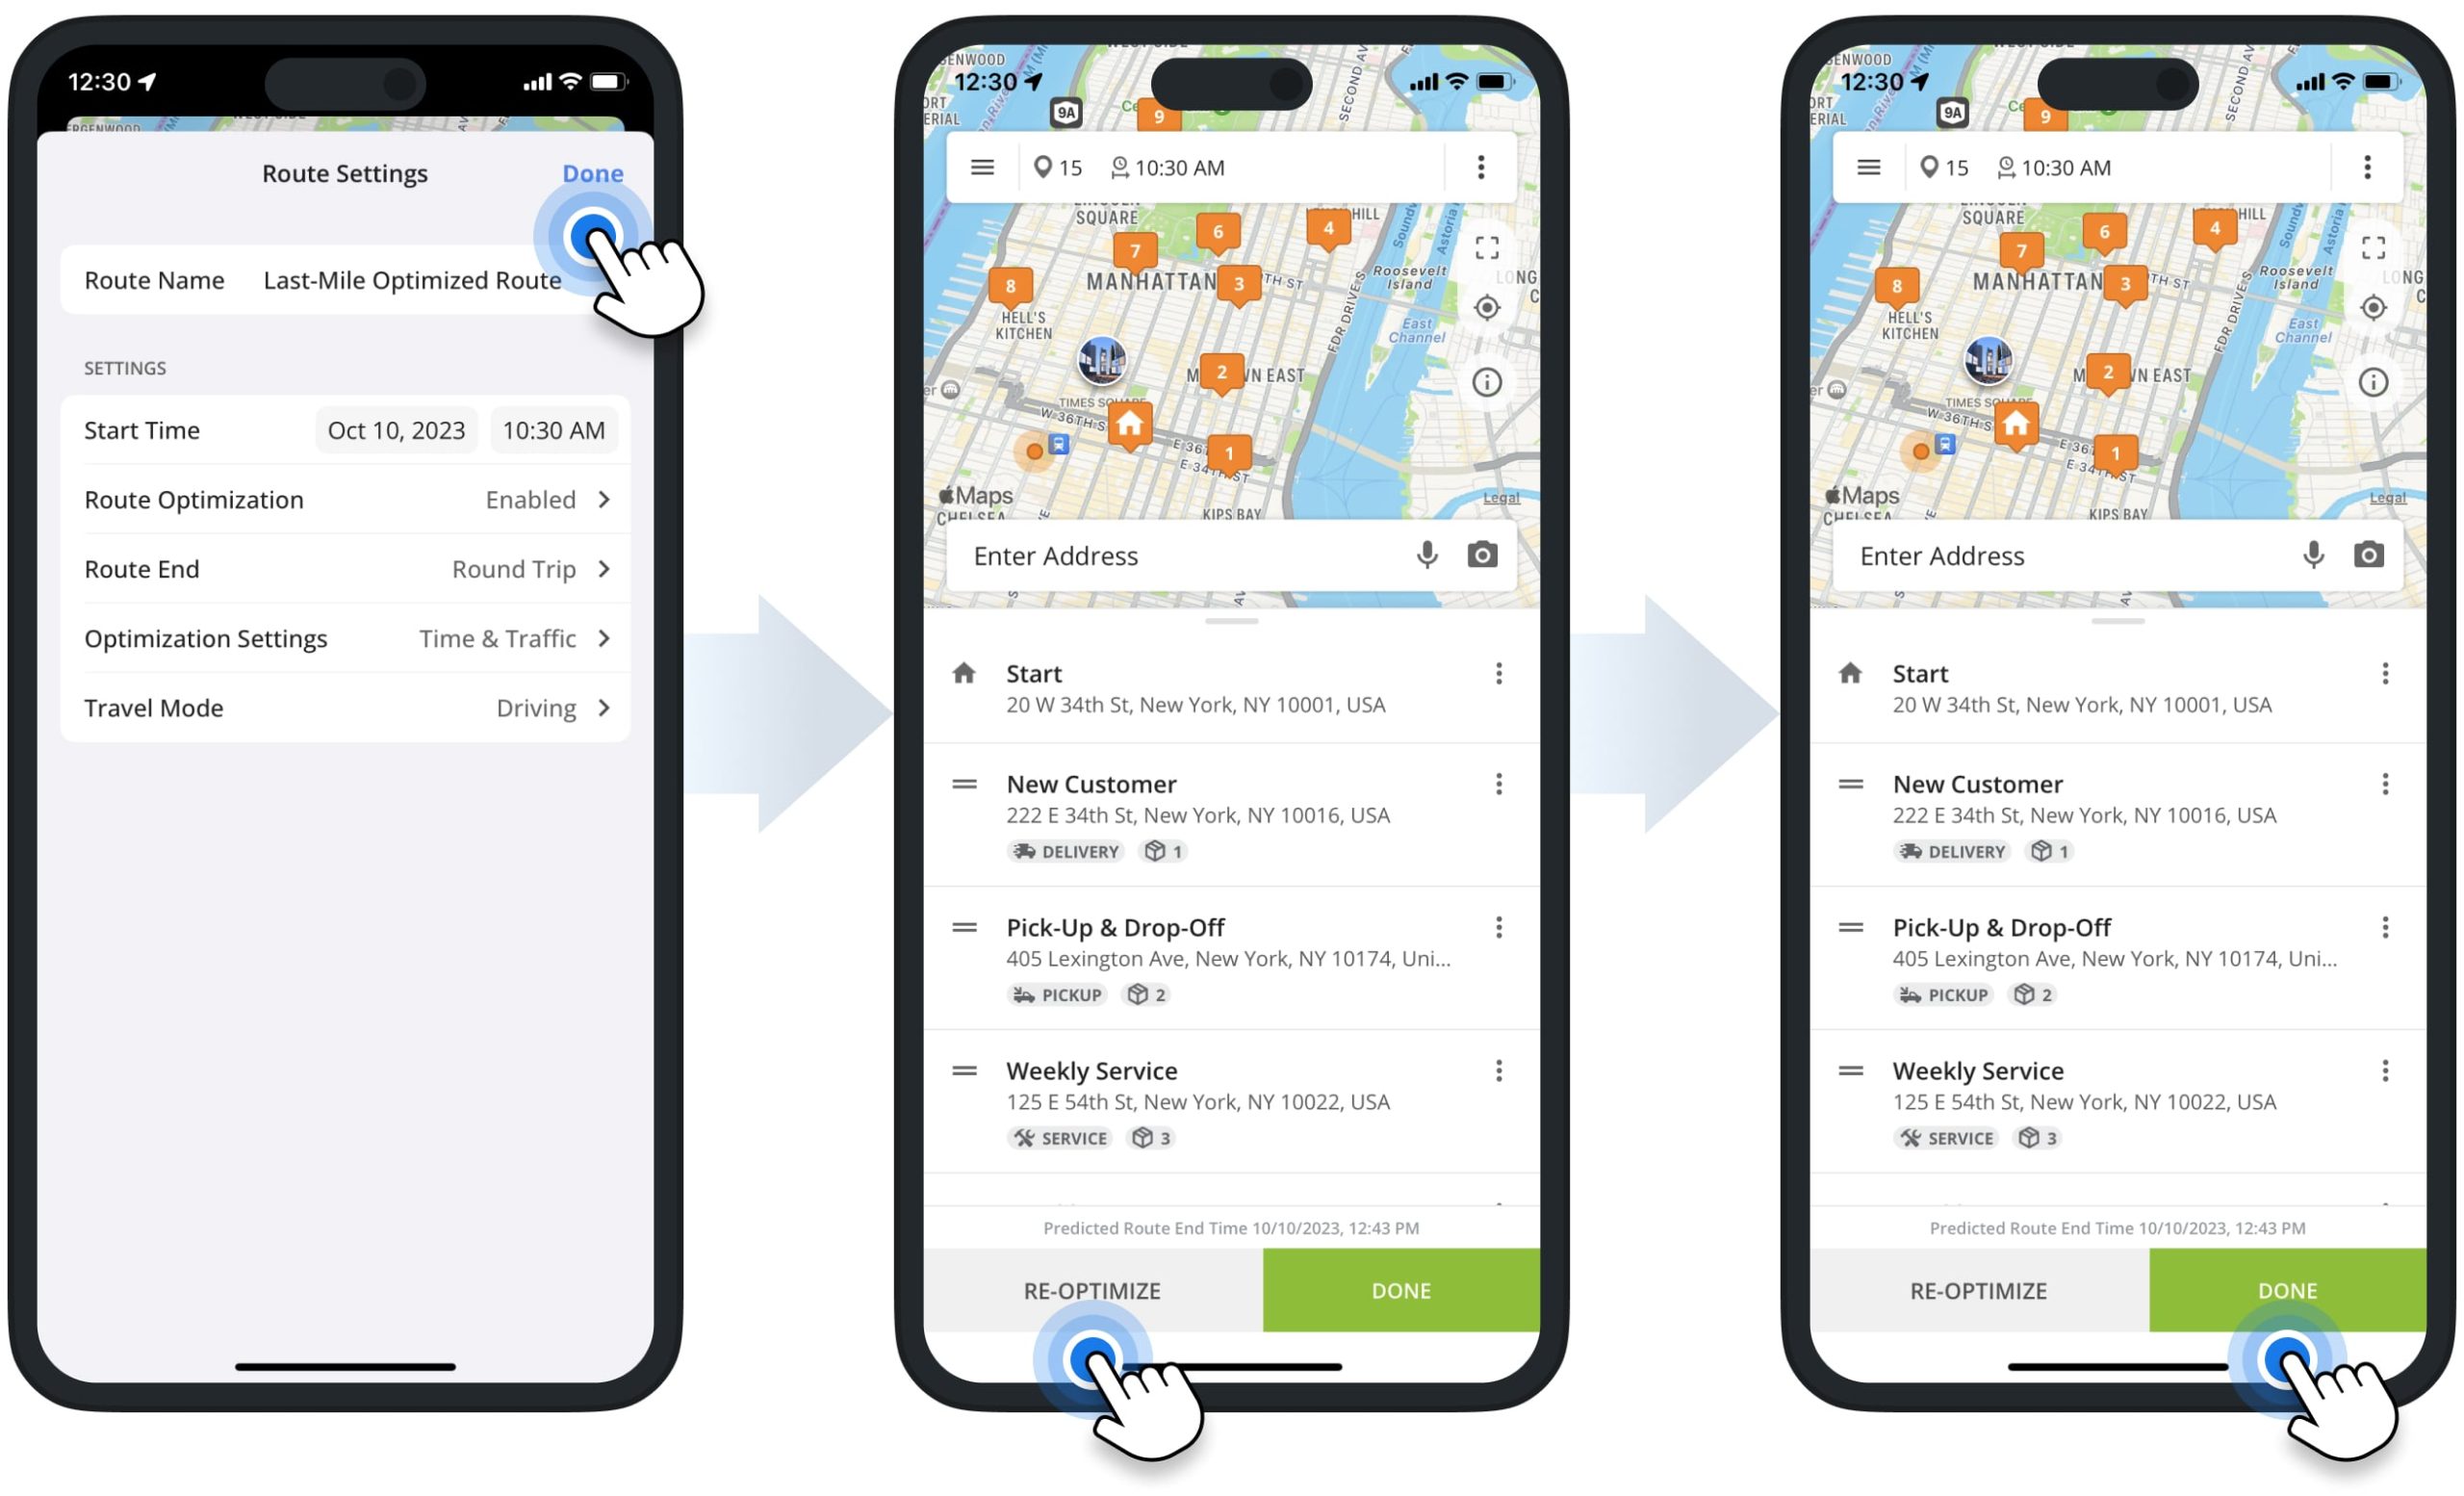 Re-optimizing multi-address routes using Route4Me's iPhone Route Planning app for delivery drivers, field service, and sales.